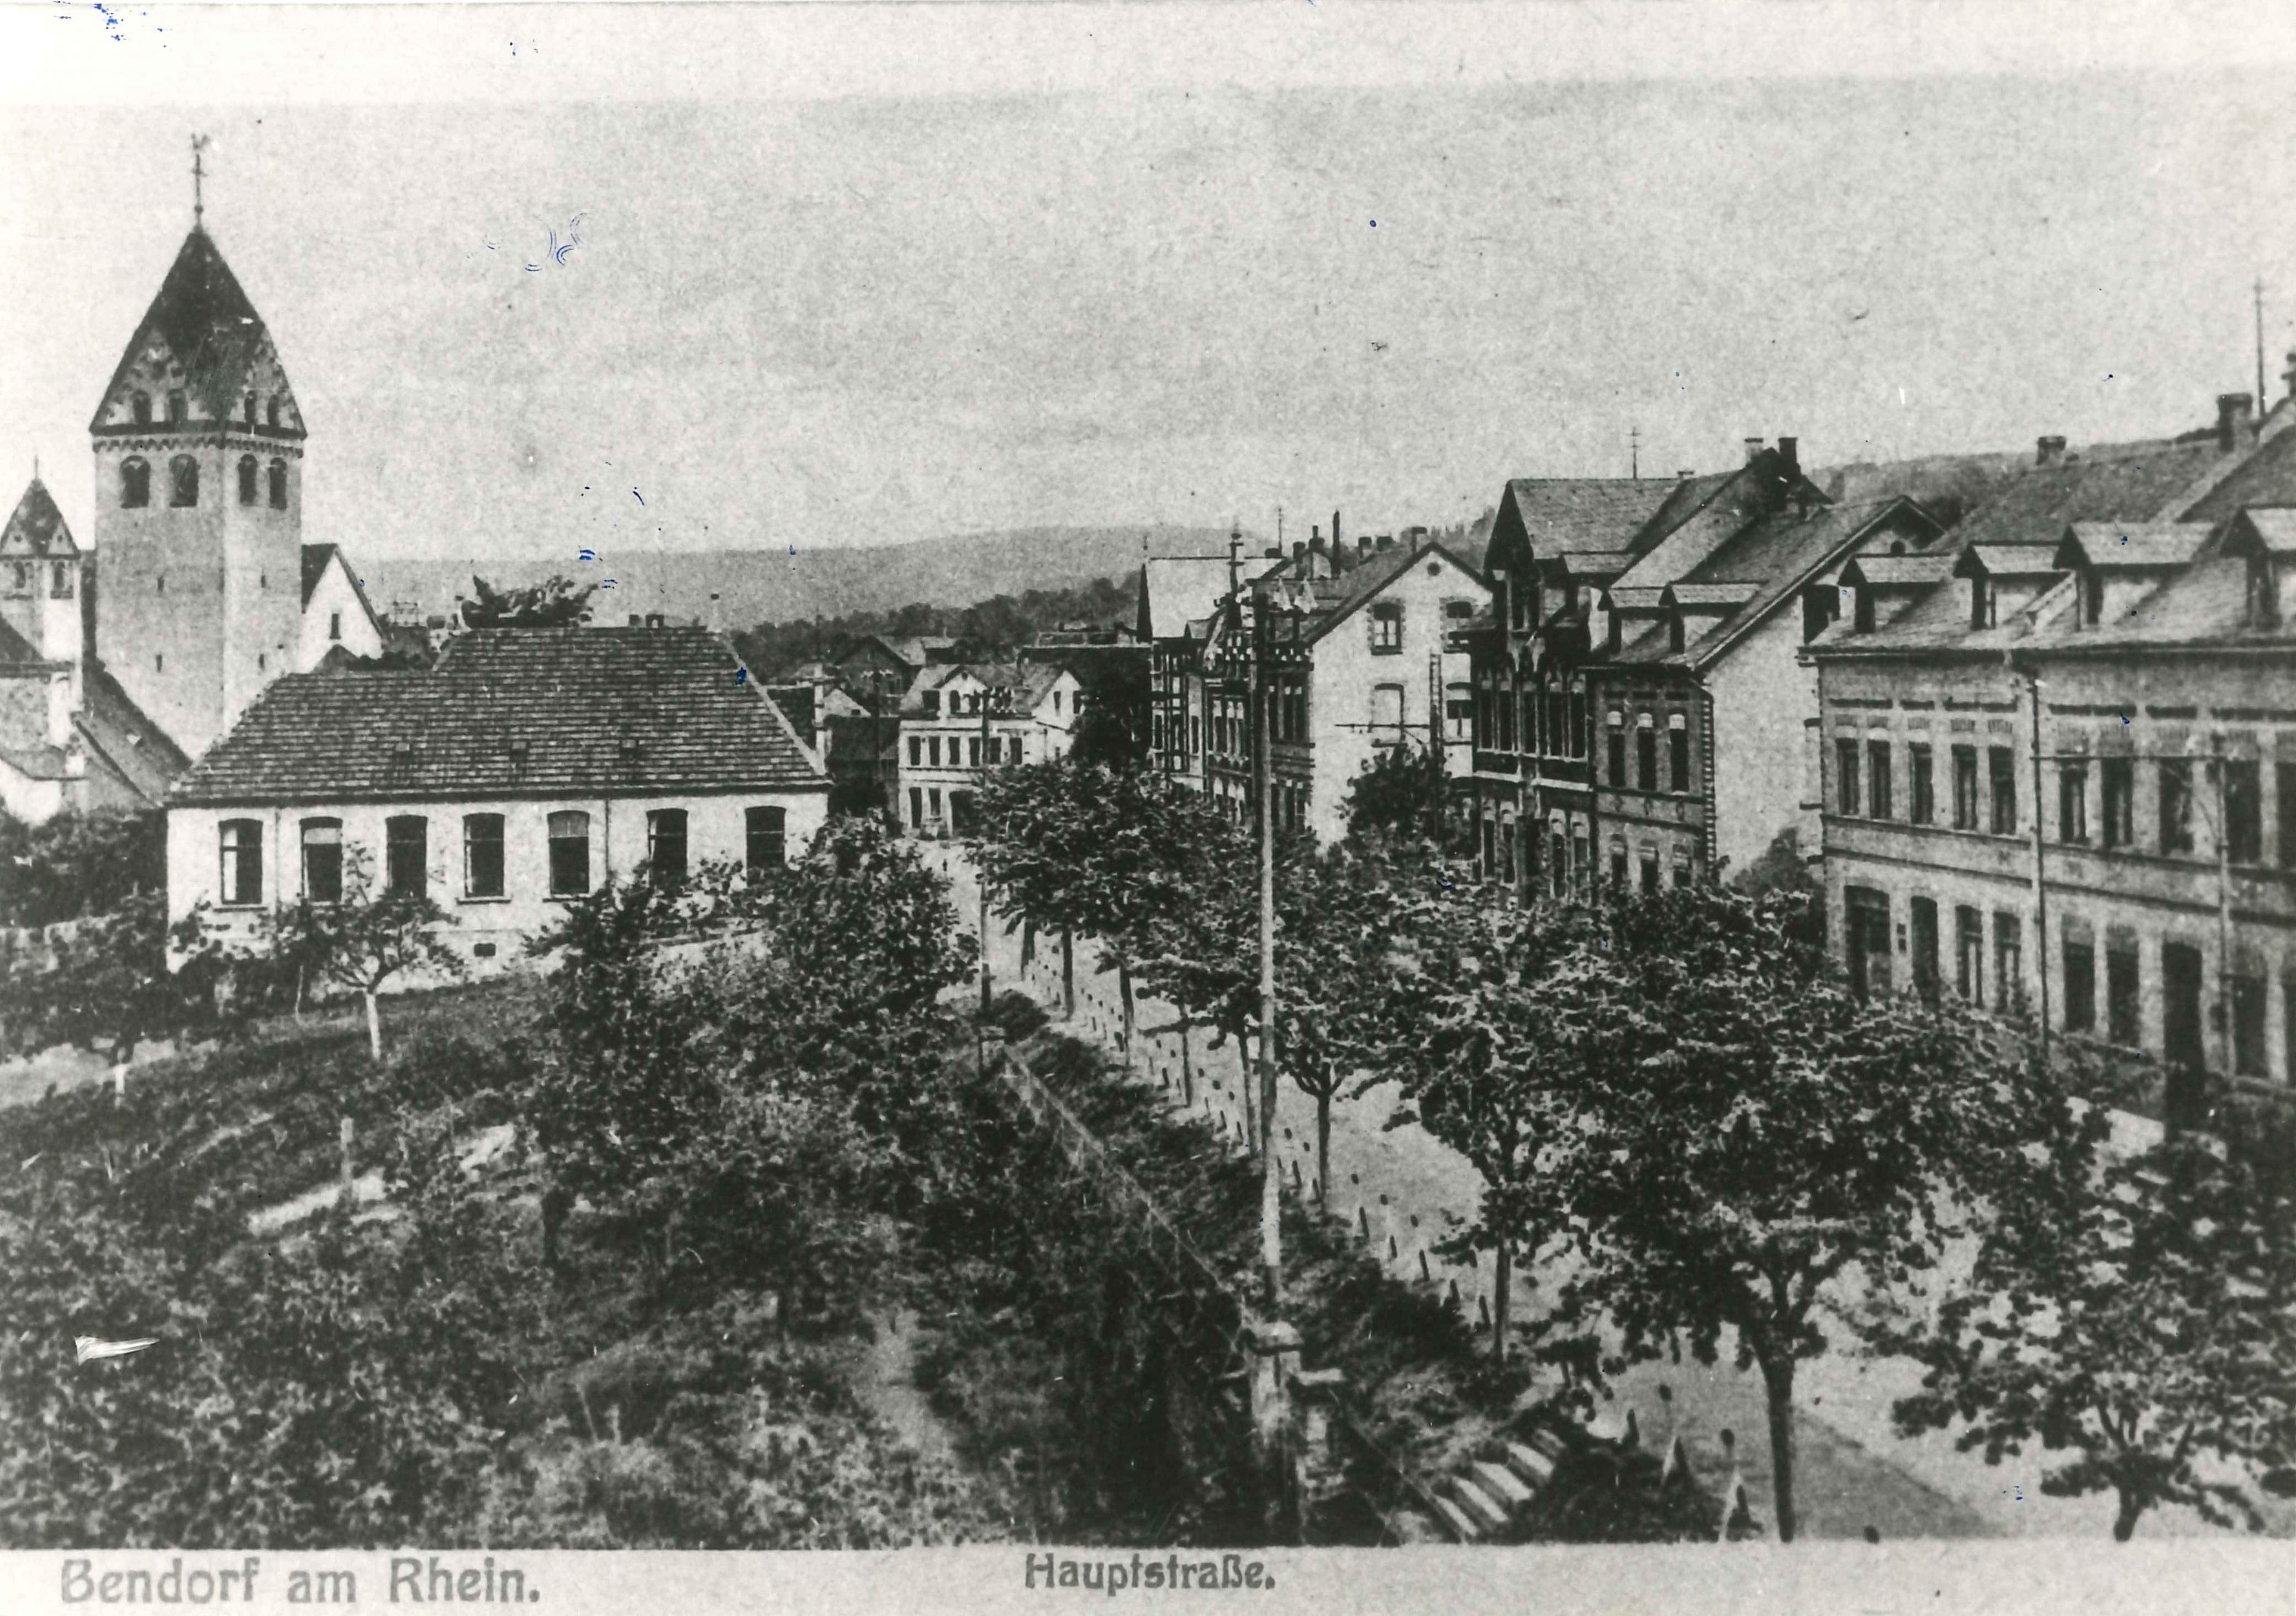 Obere Hauptstrasse in Bendorf um 1910 (REM CC BY-NC-SA)